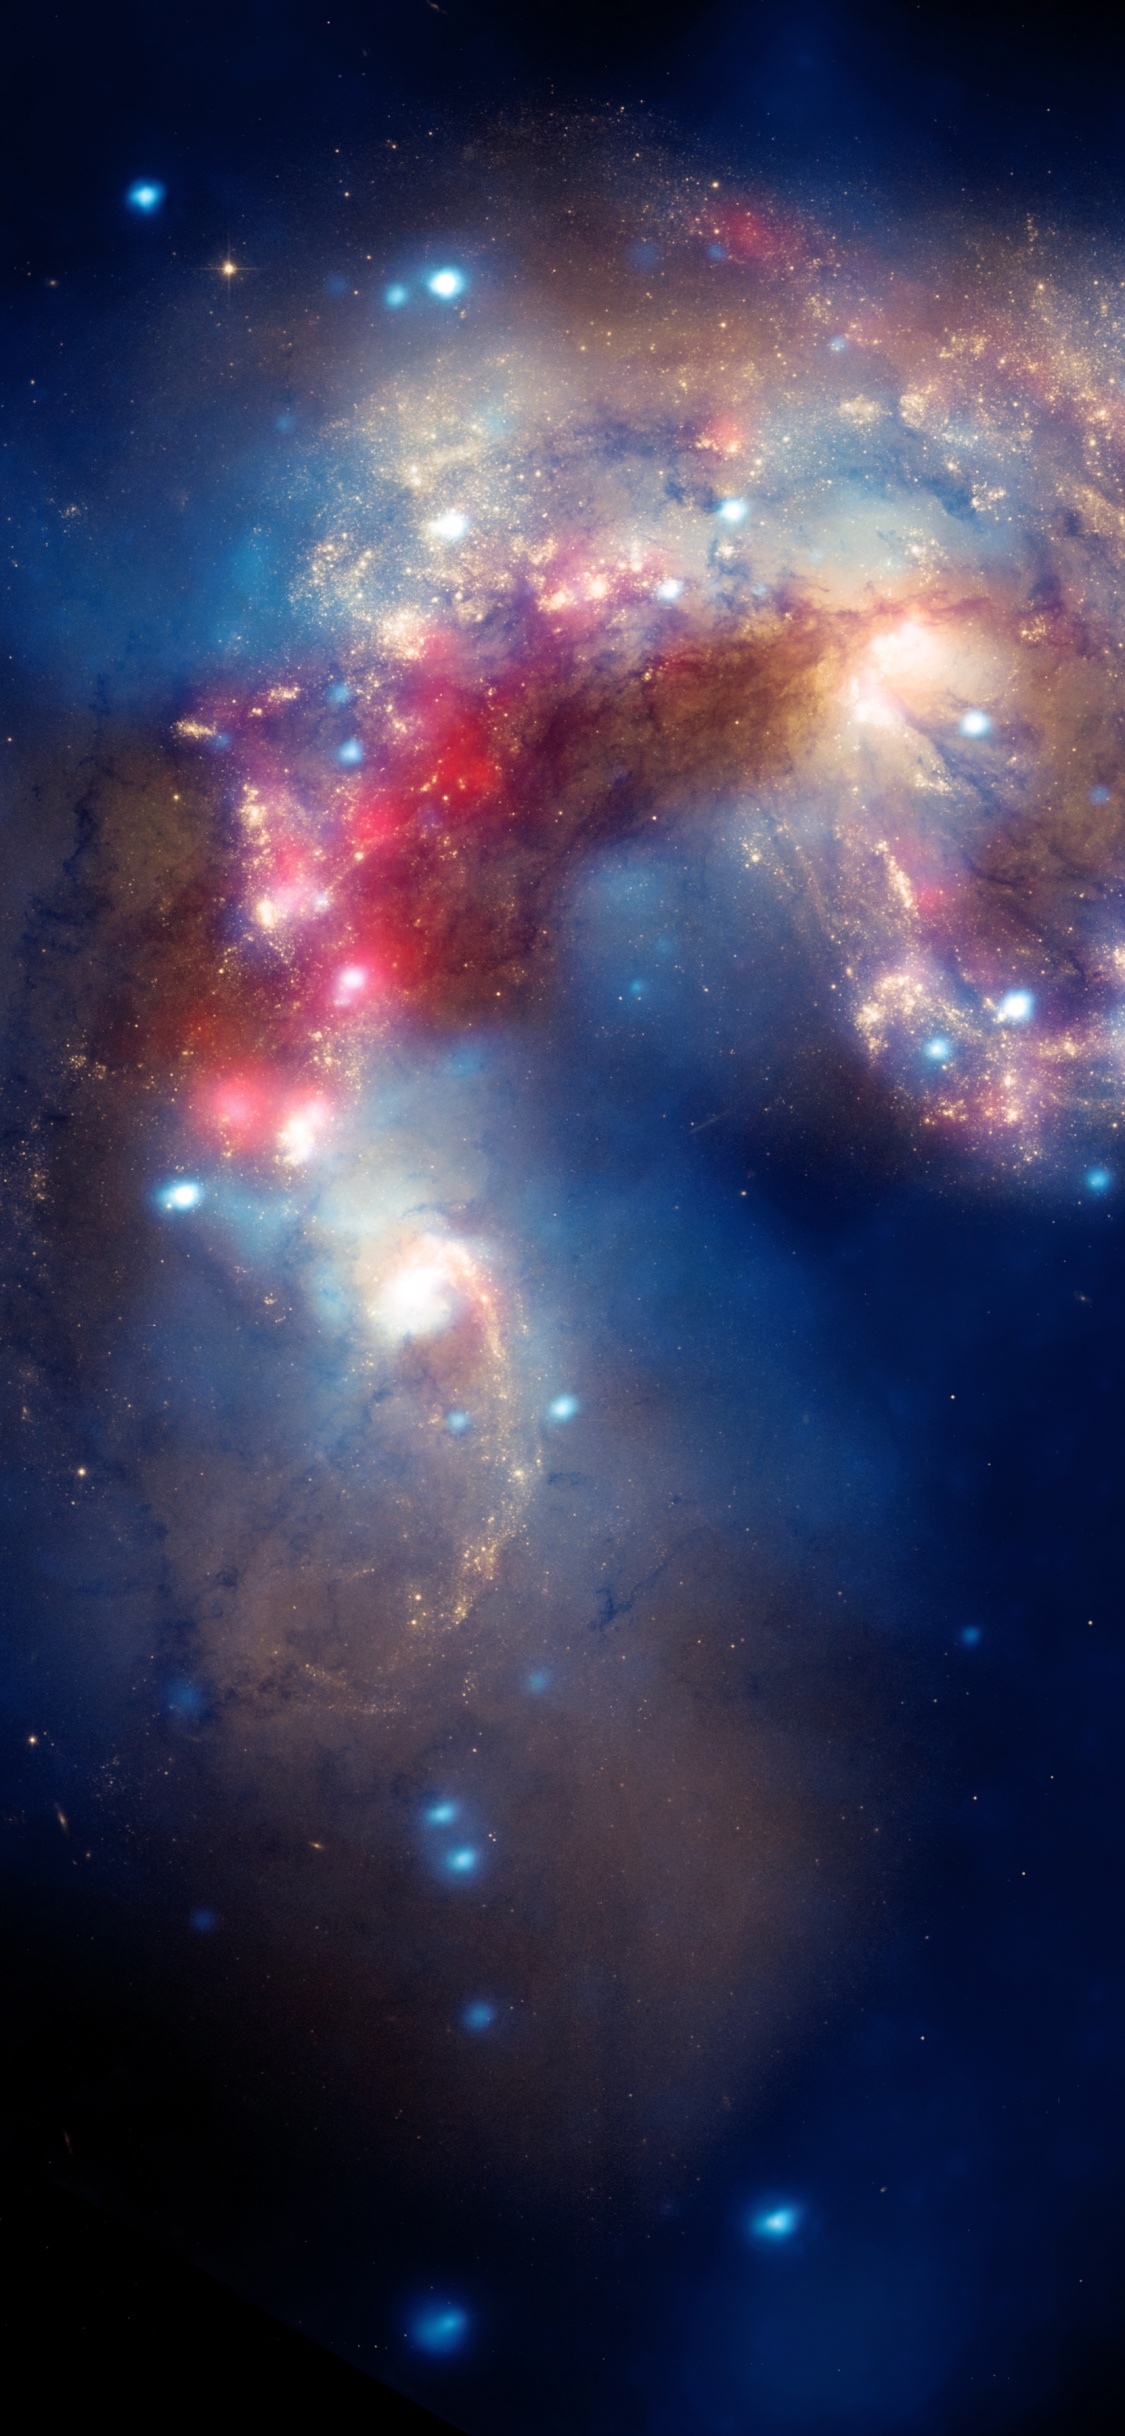 Blue and Red Galaxy Illustration. Wallpaper in 1125x2436 Resolution